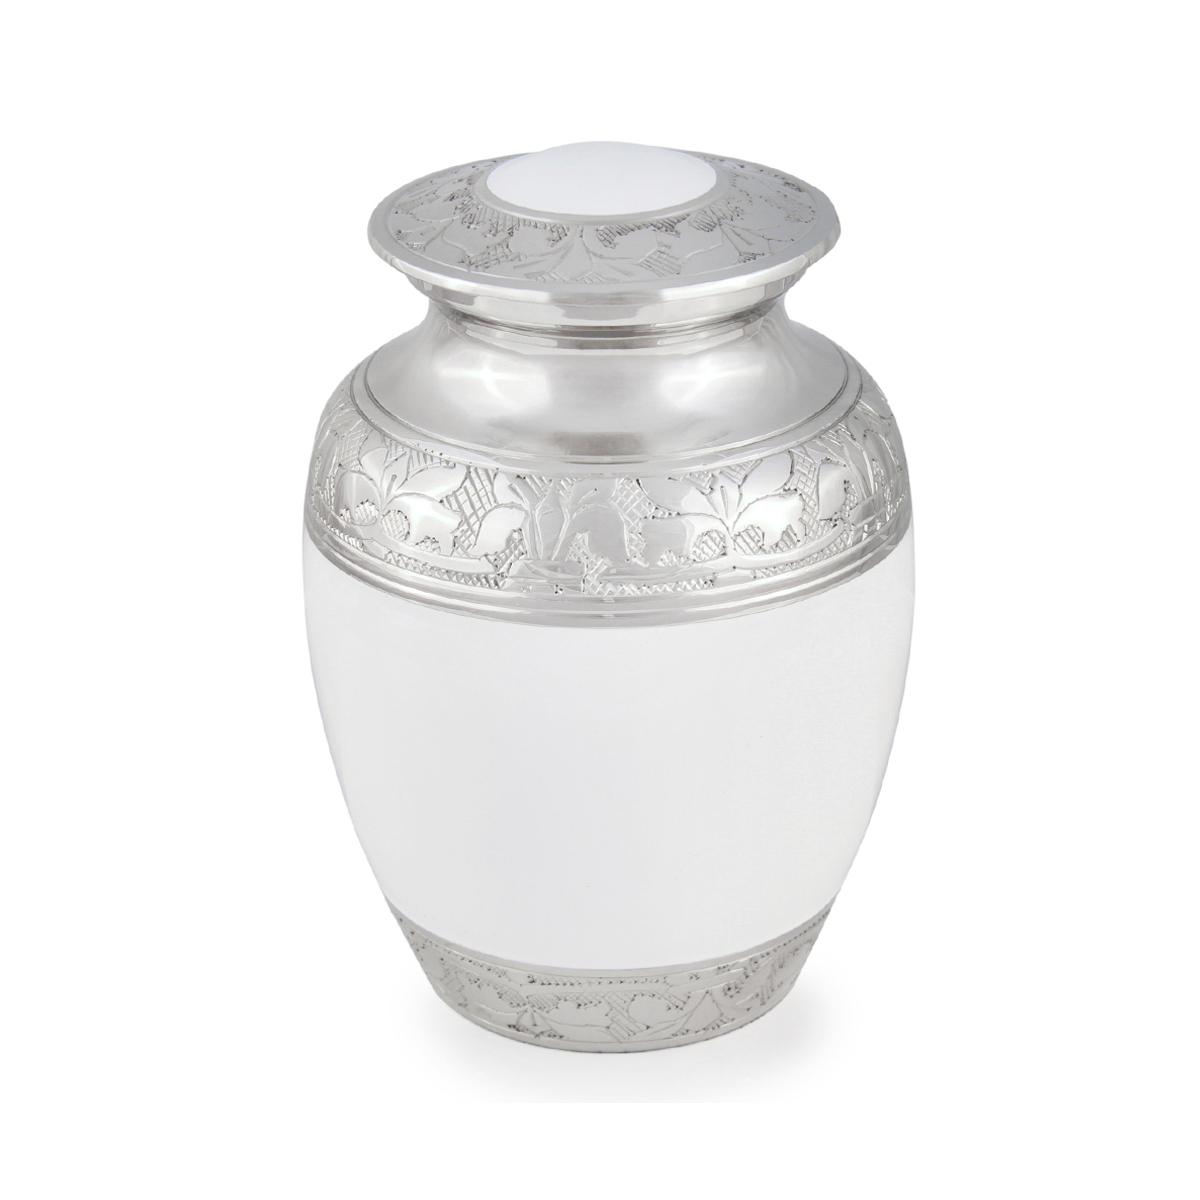 Designer Purity Engraved Urn (Polished Nickel/White) » Paws to Heaven